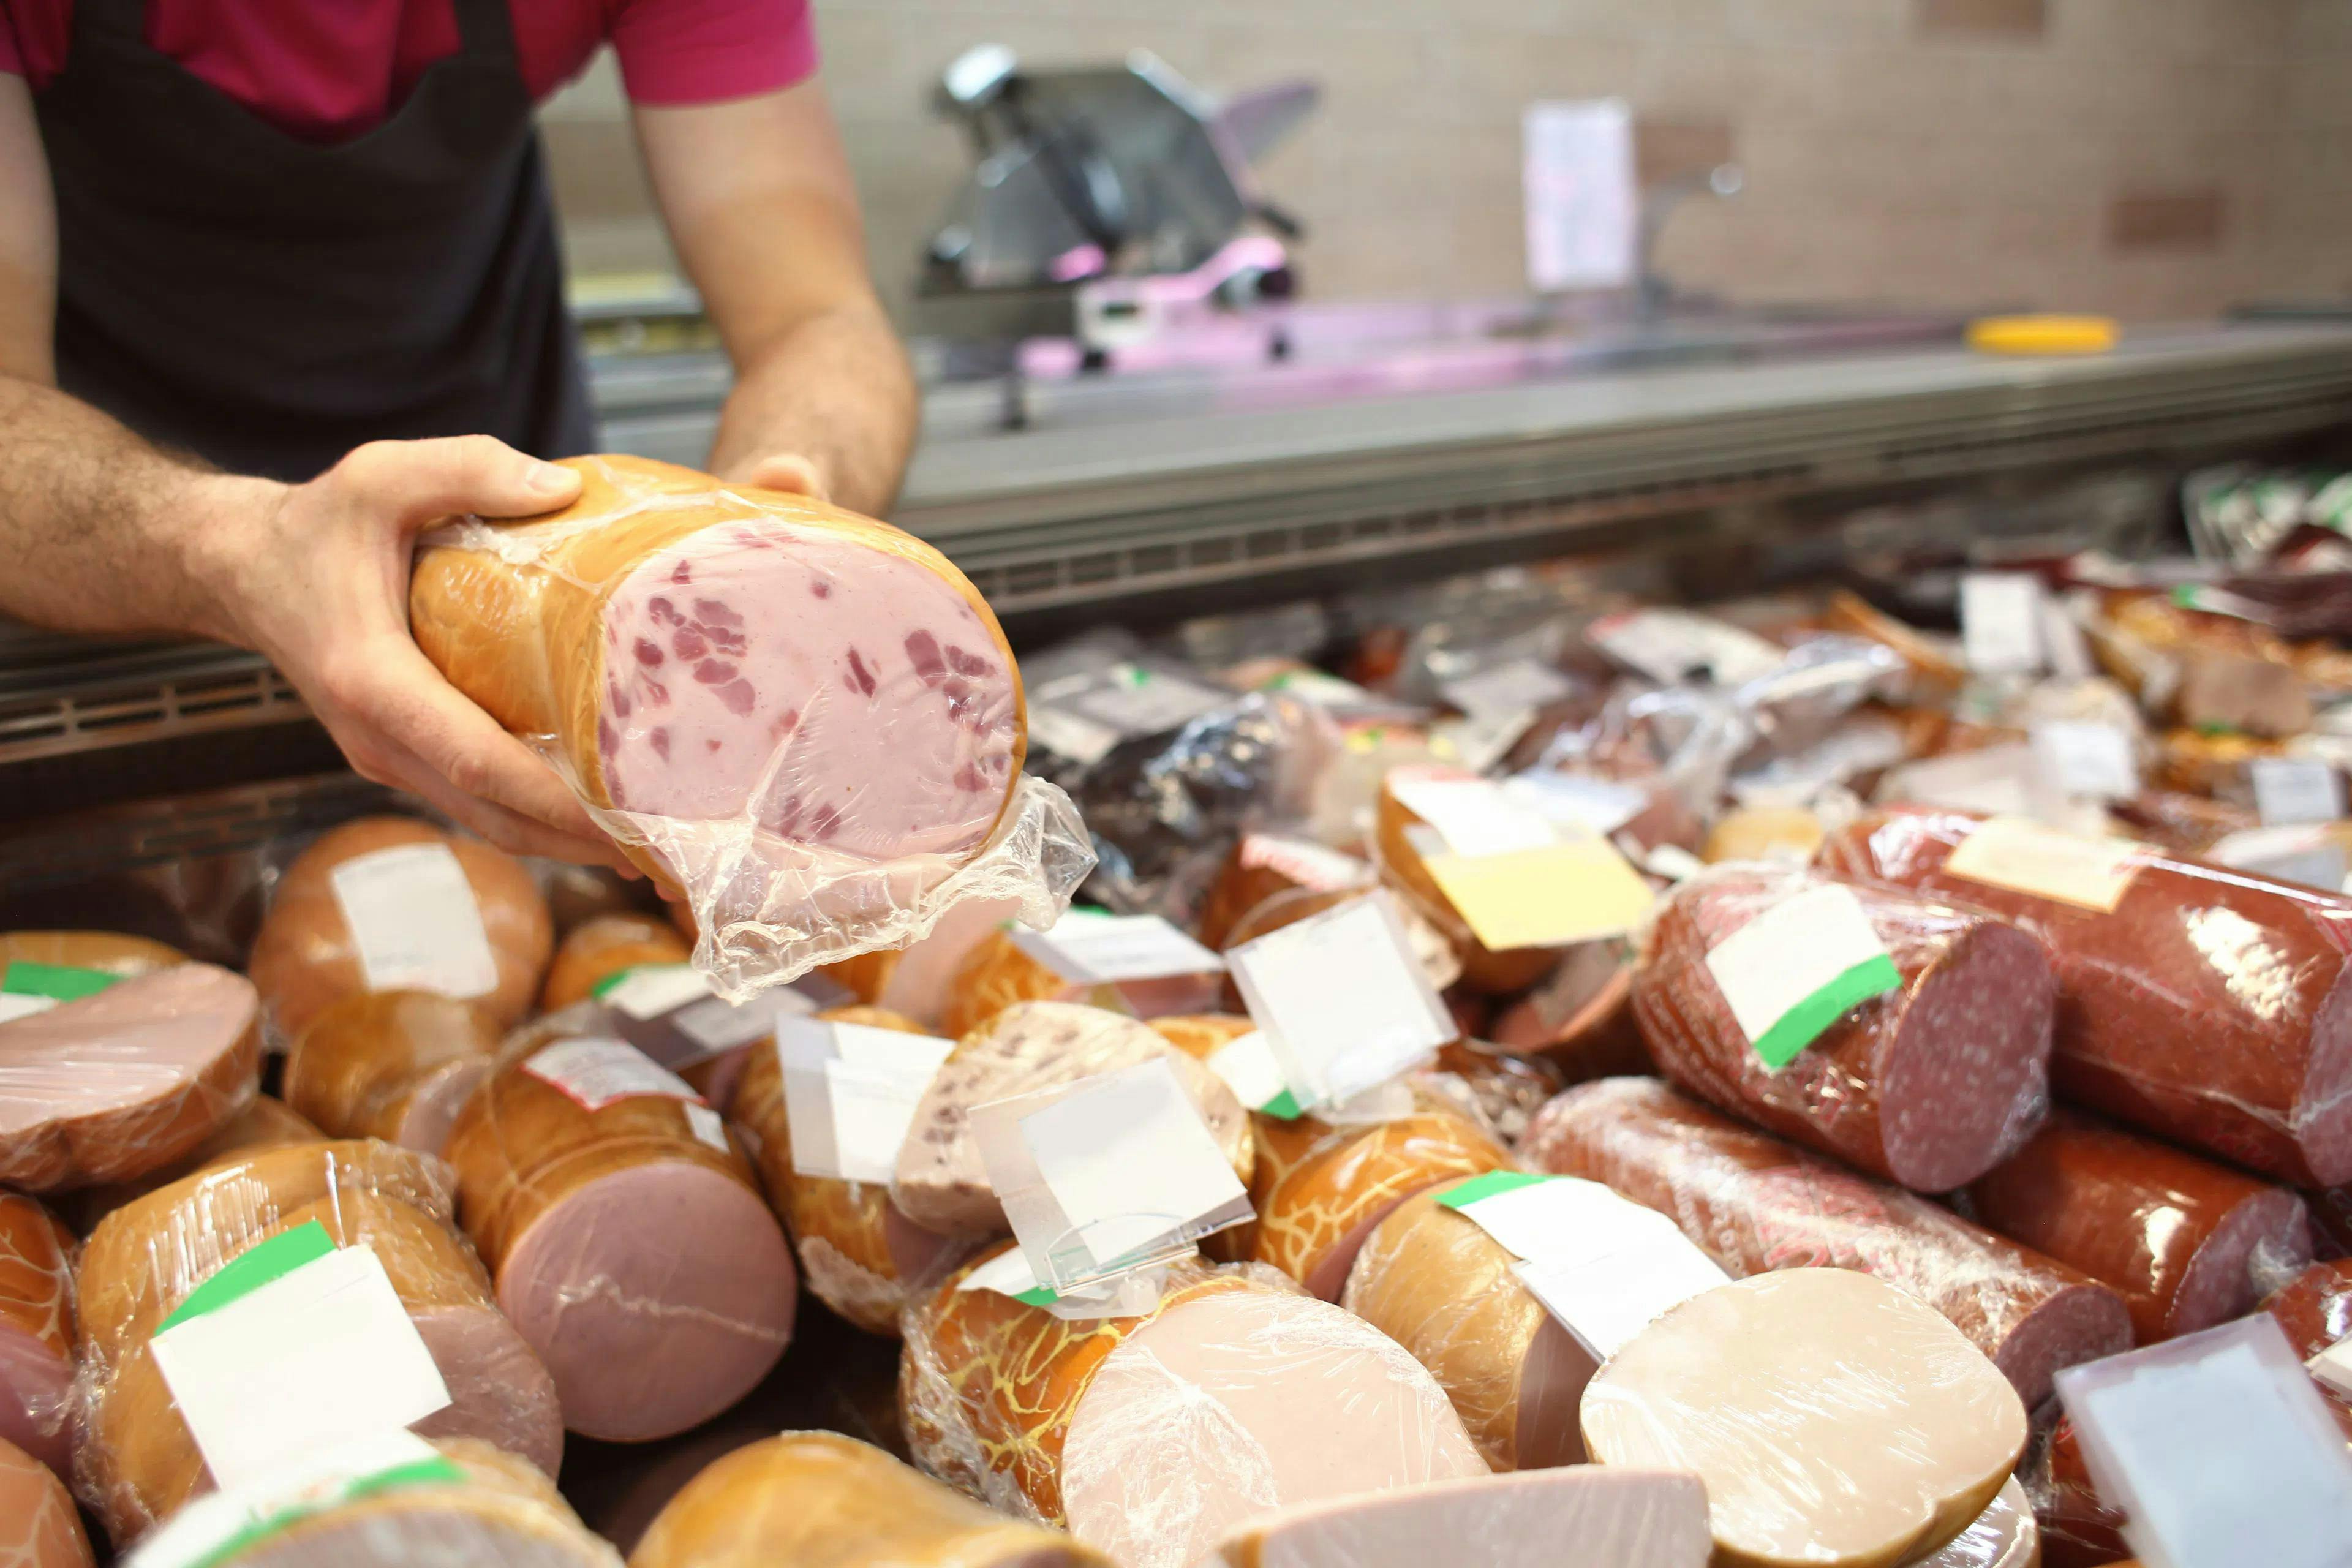 CDC reports listeria outbreak linked to deli meats | Image Credit: © Pixel-Shot - © Pixel-Shot - stock.adobe.com.